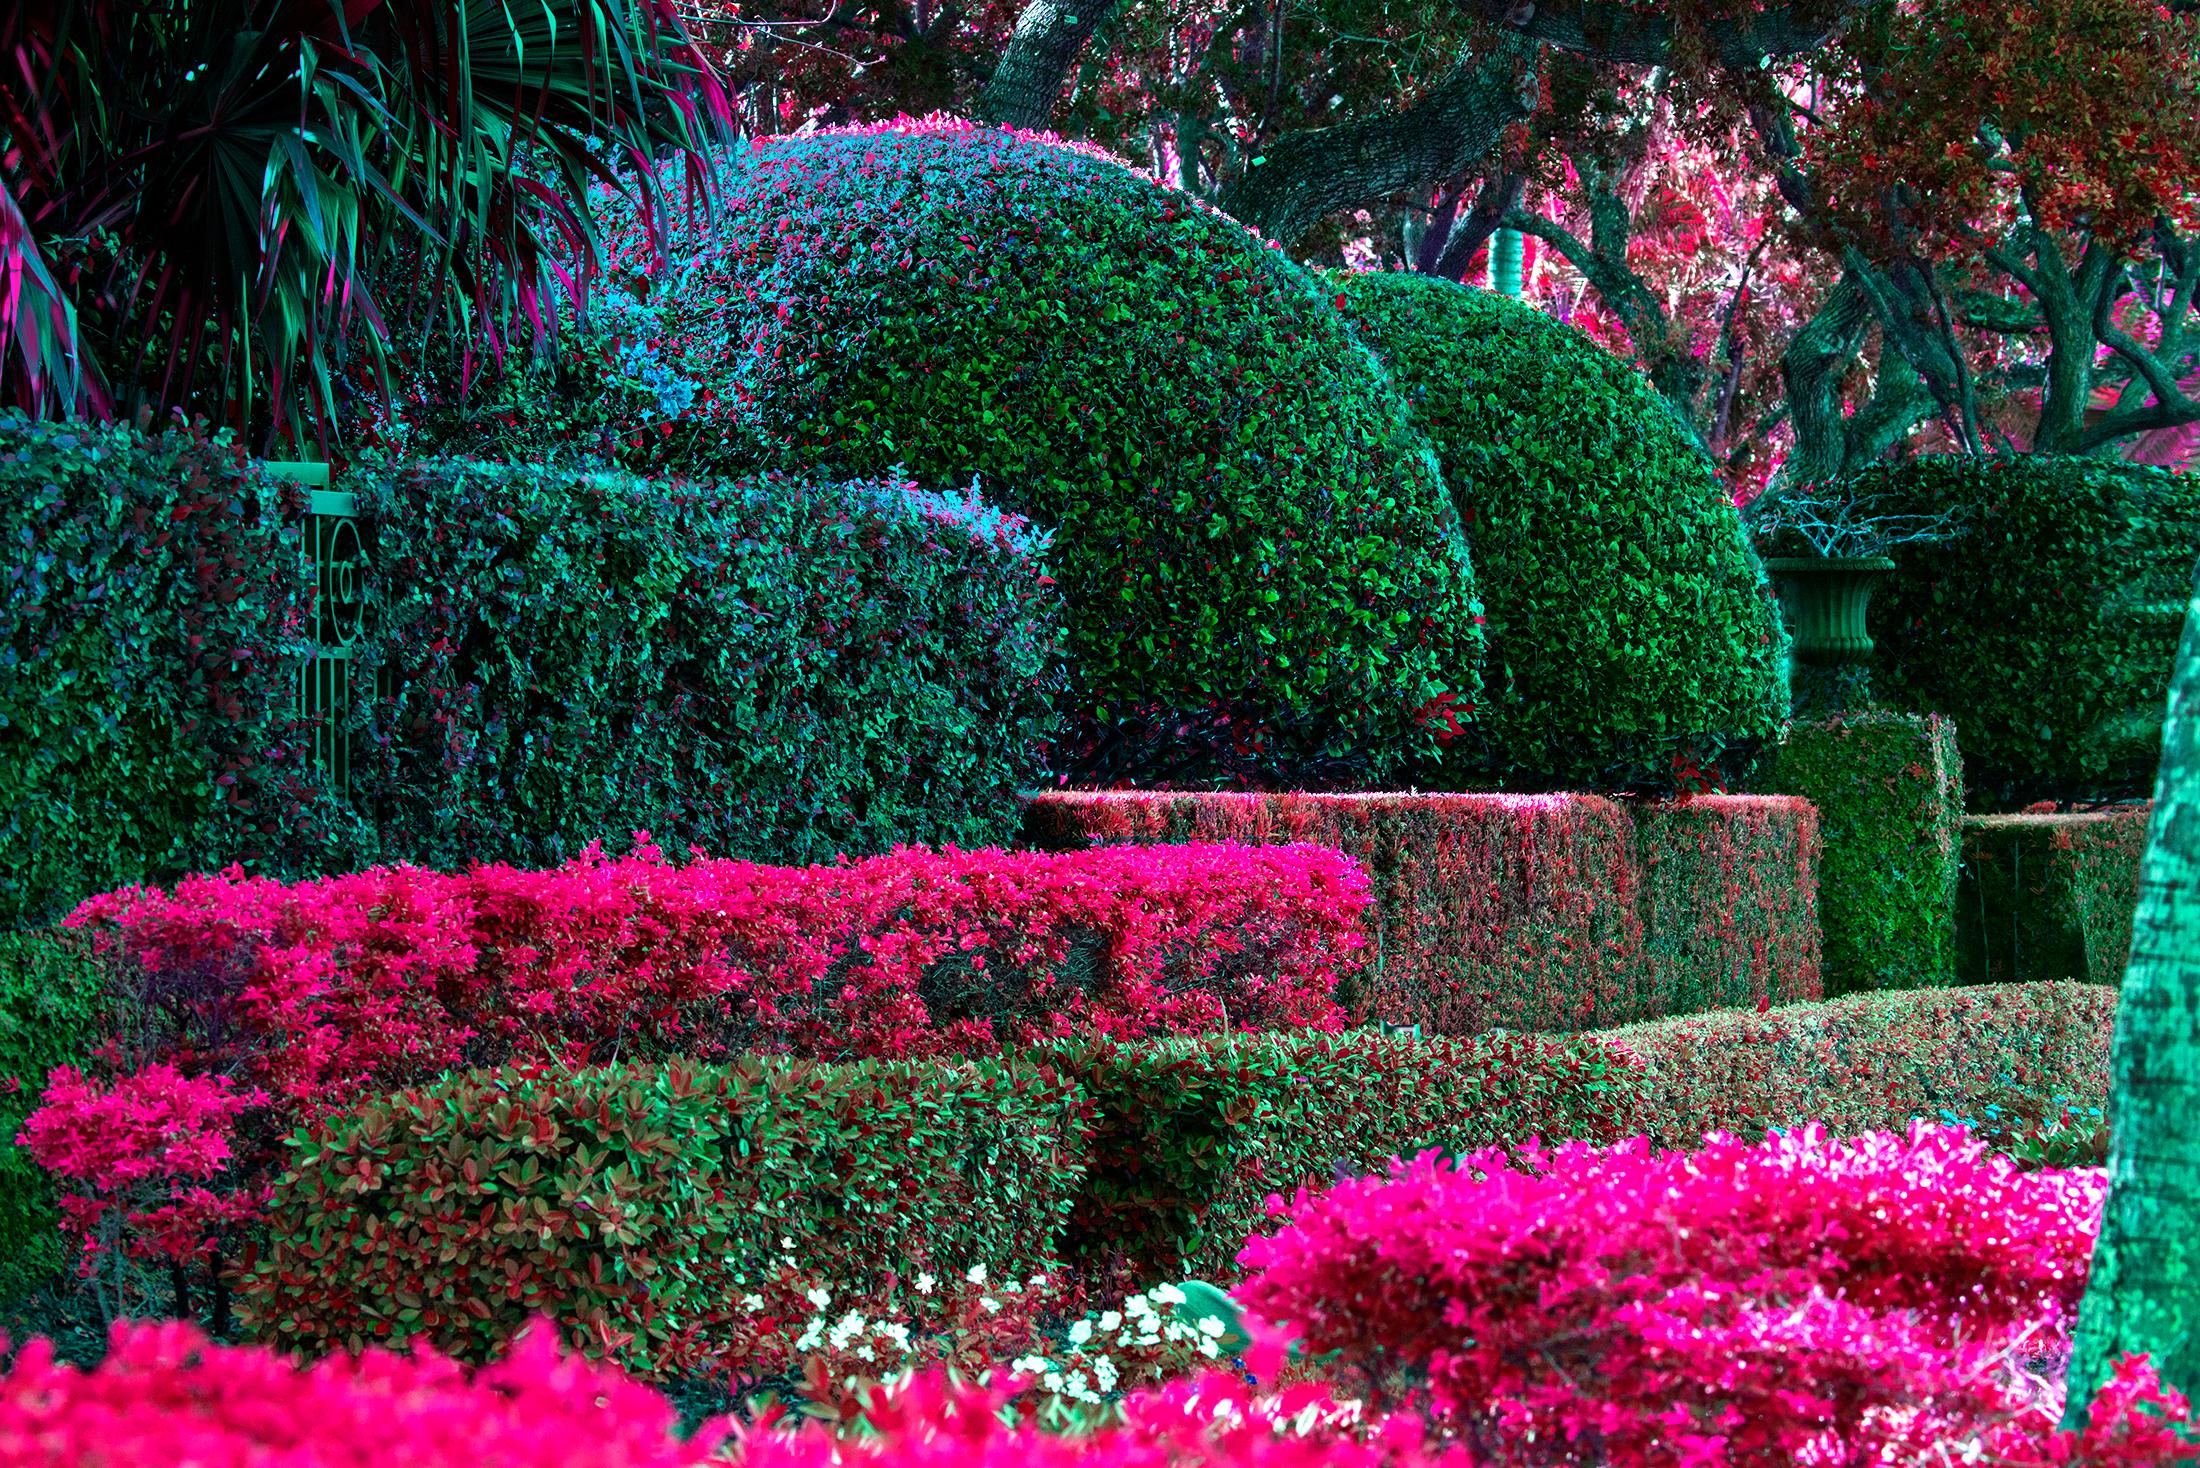 Hedge Fun - The Biltmore Hotel Coral Gables